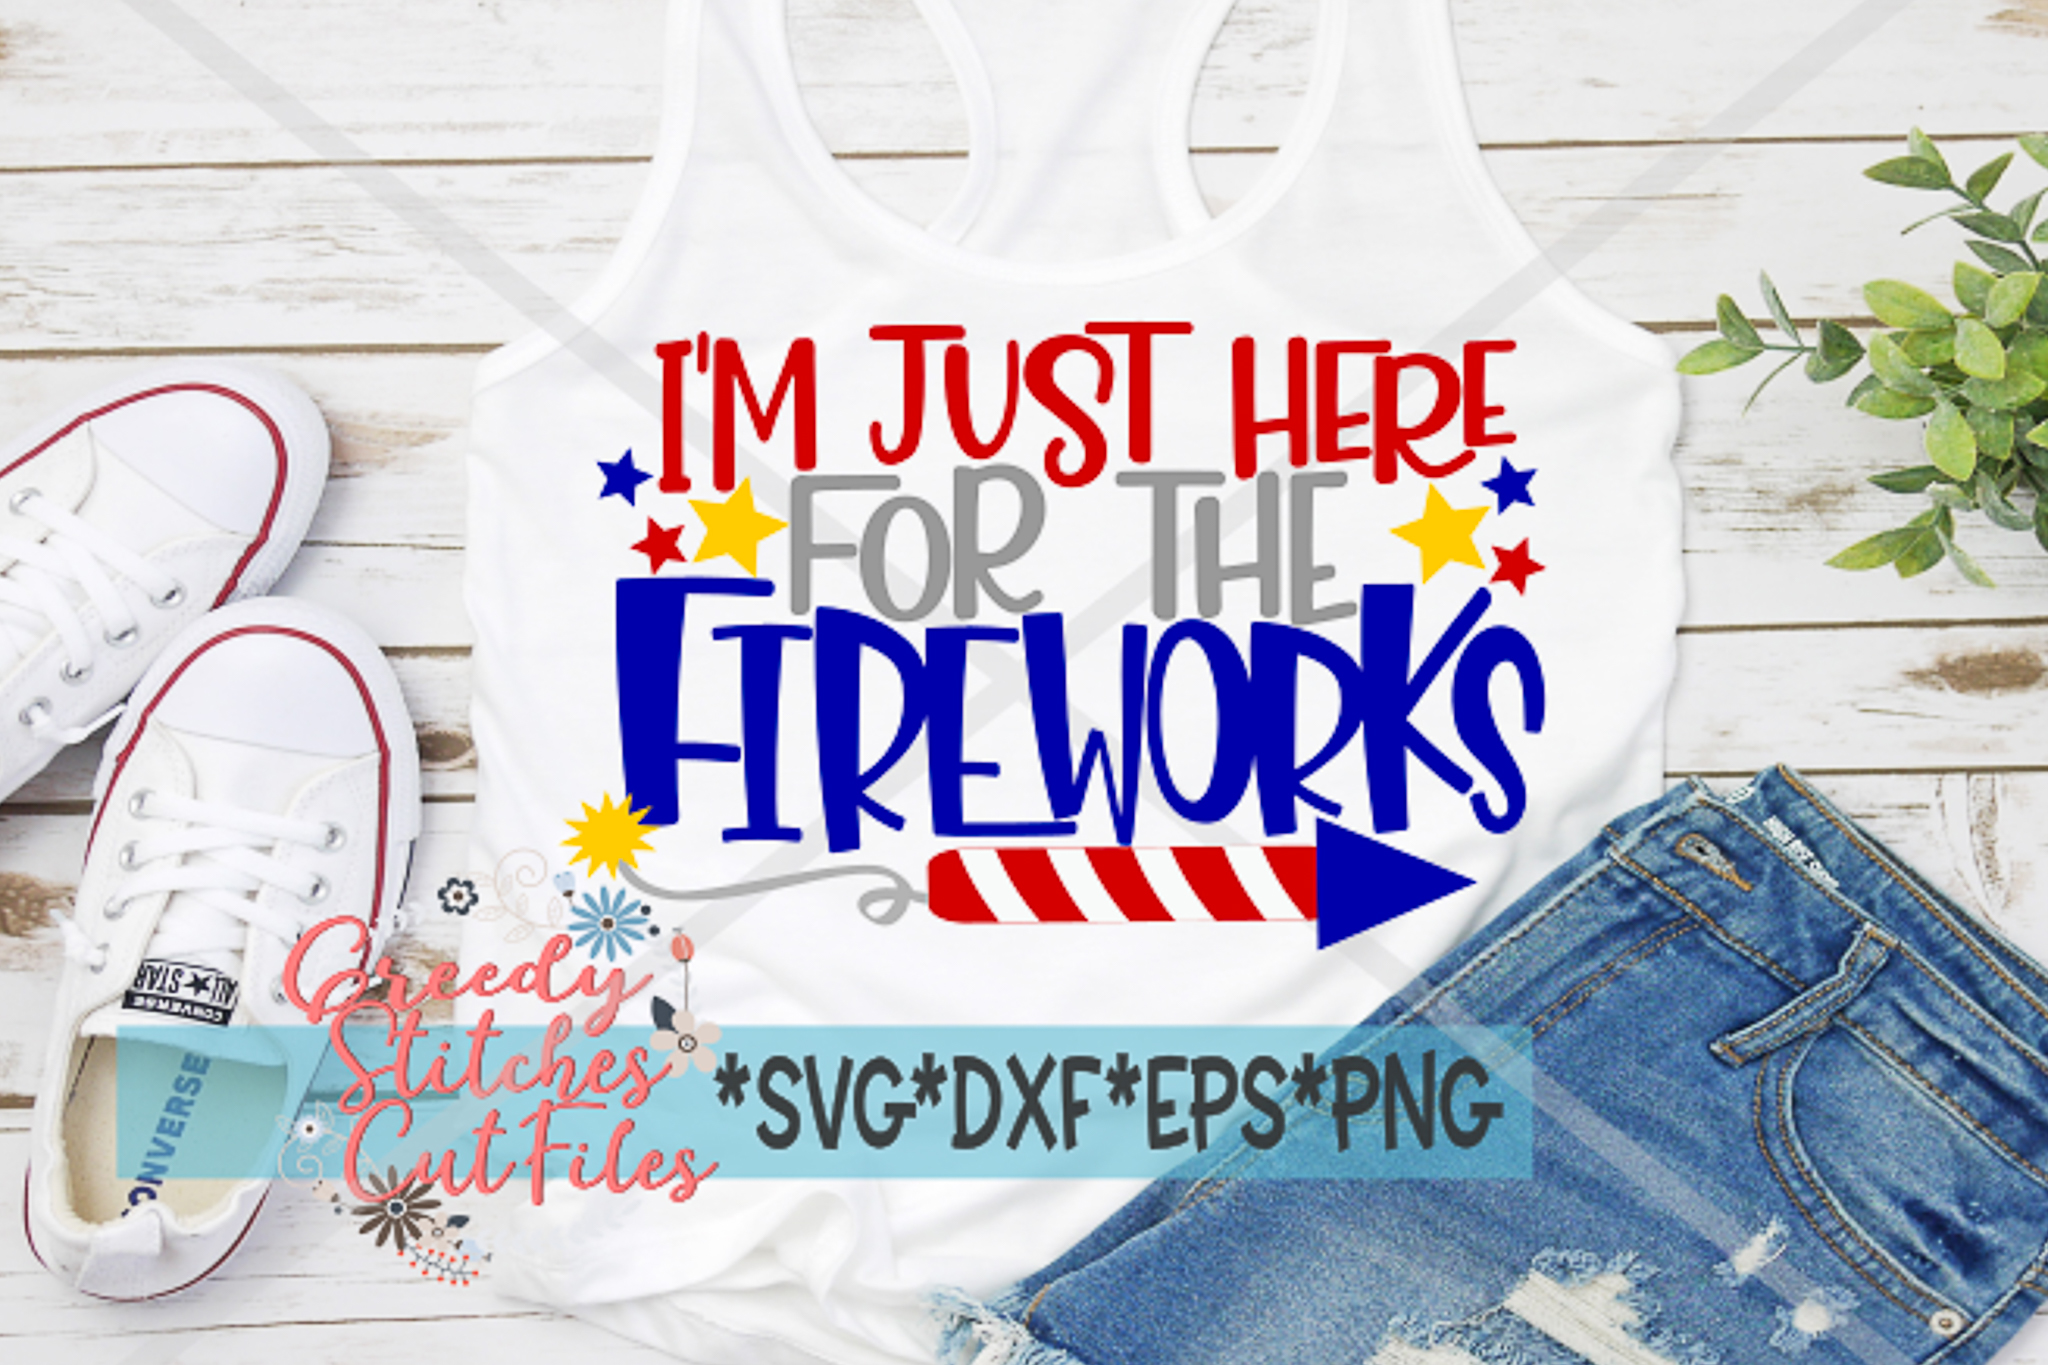 Download July 4th SVG | I'm Just Here For The Fireworks SVG, DXF, EPS